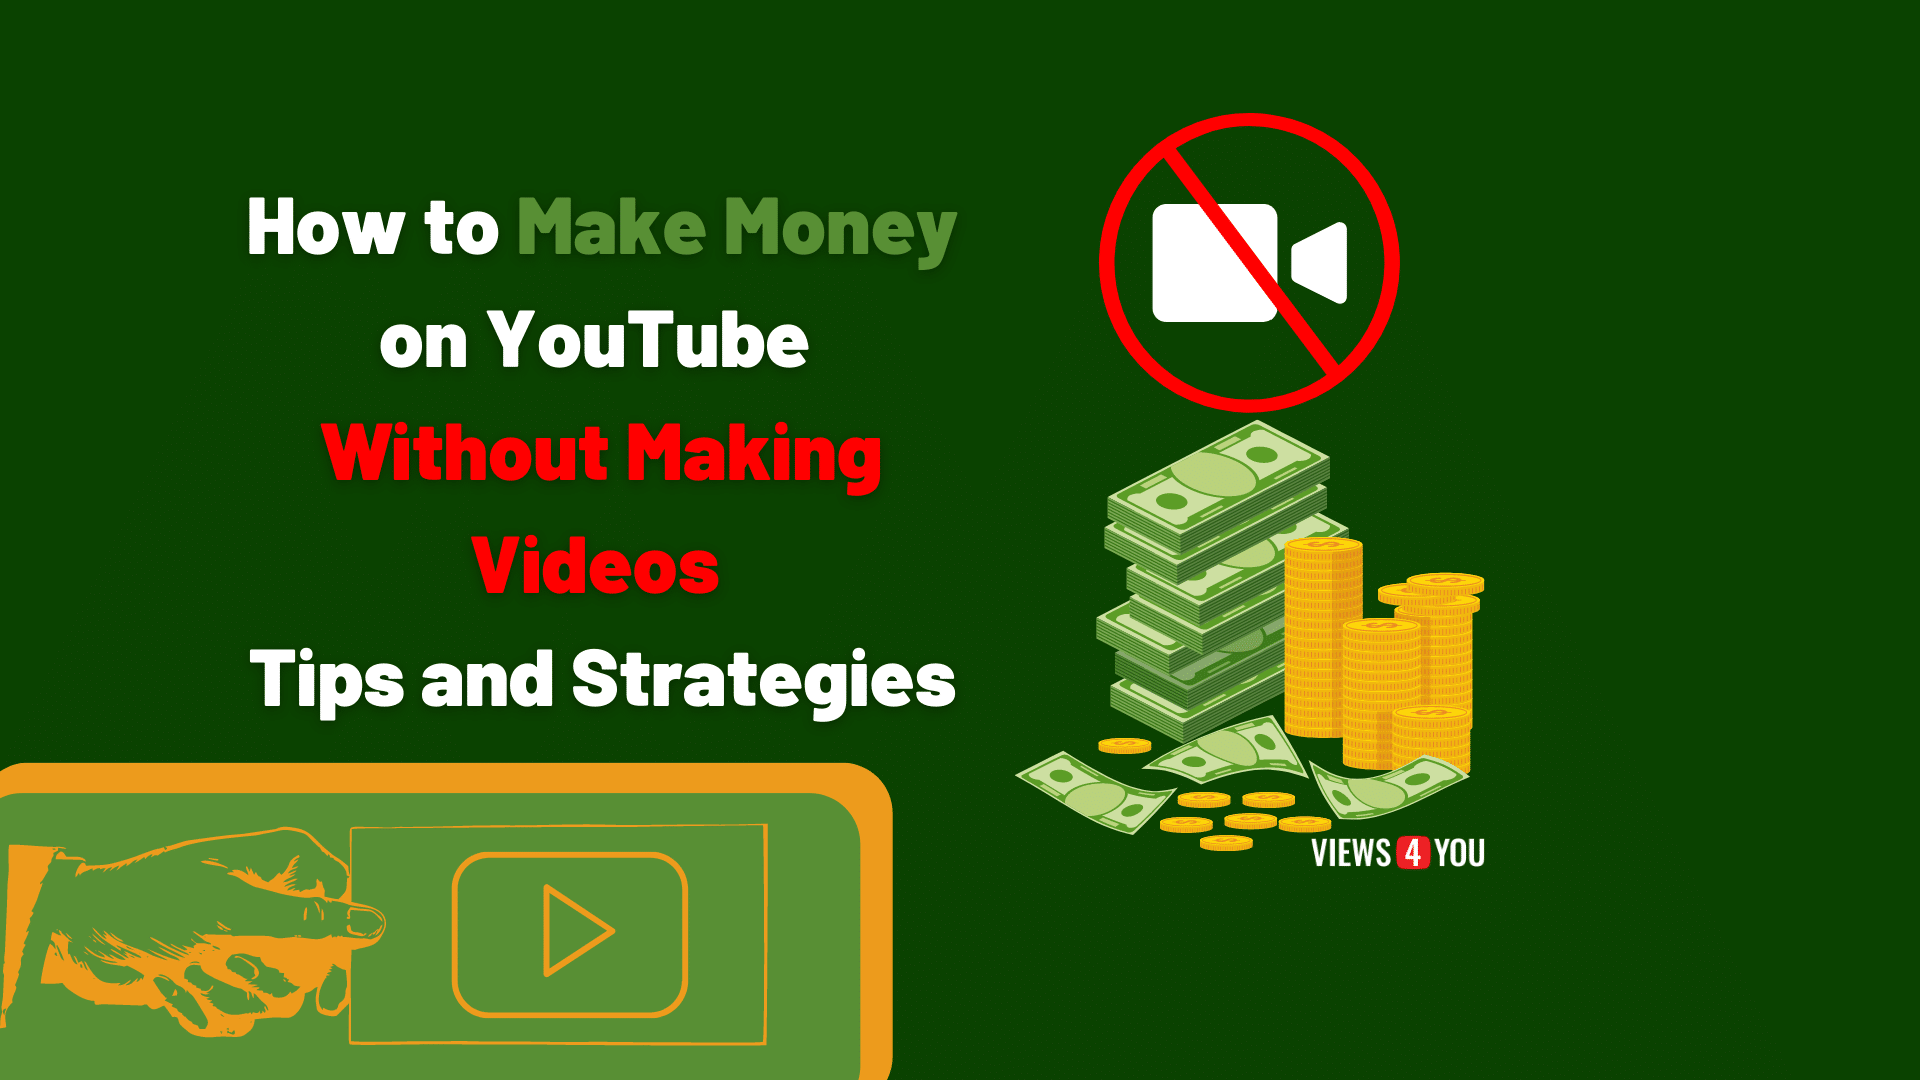 How to make money on YouTube without making videos: tips and strategies by Views4You.